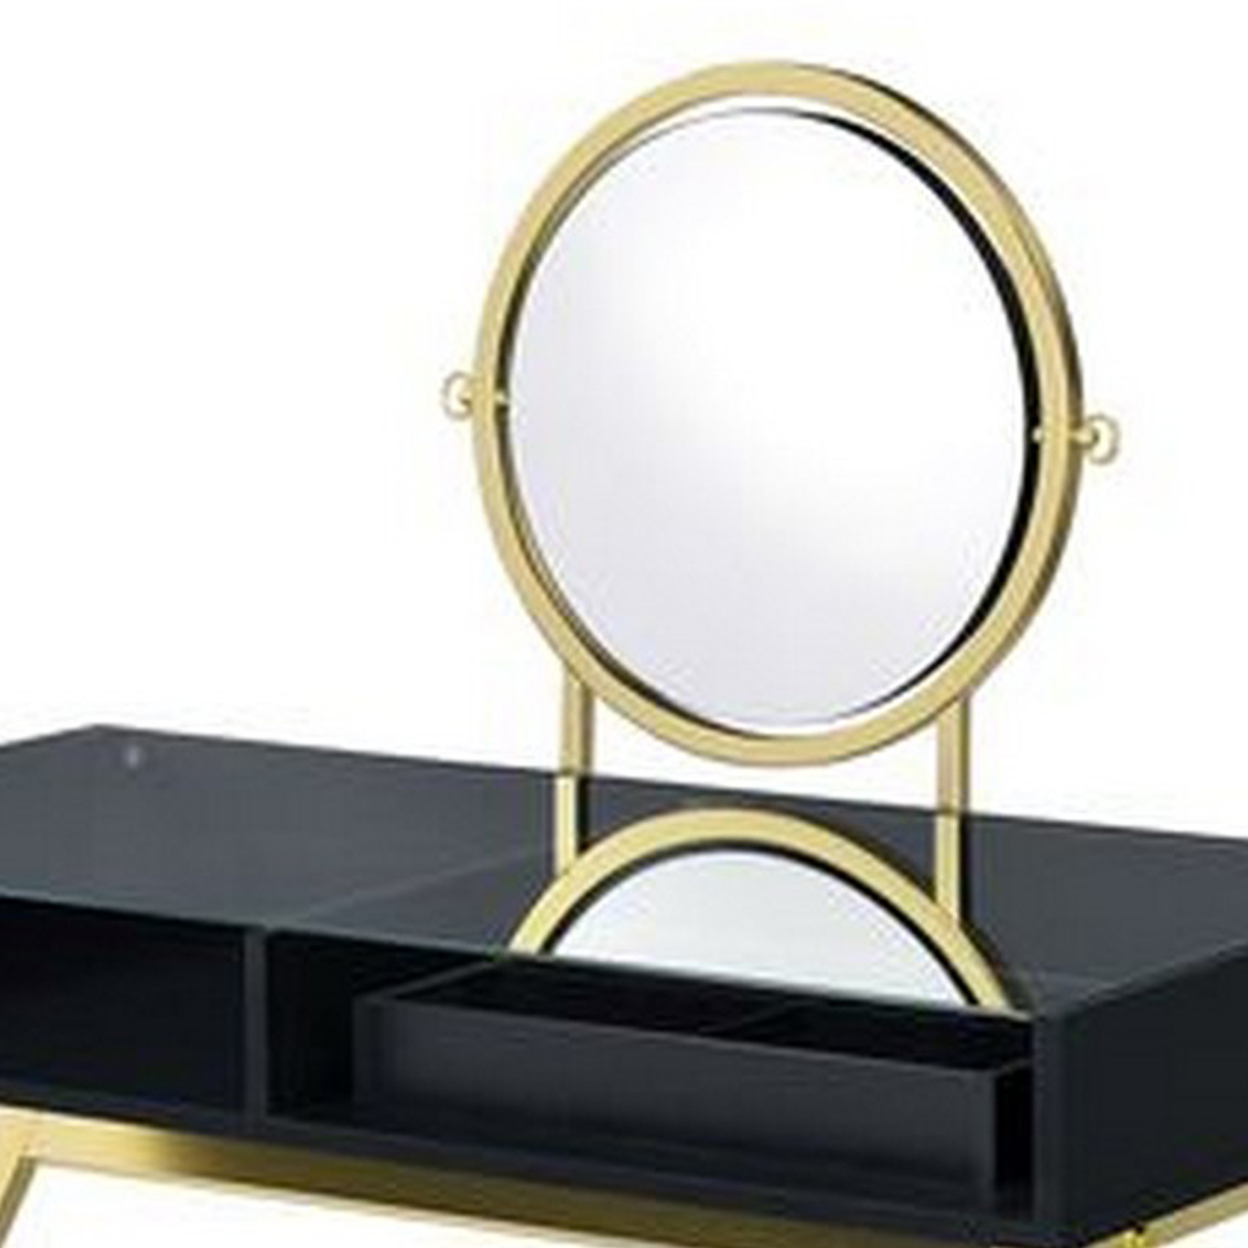 Vanity Desk With Round Mirror And Cross Metal Legs, Black And Gold- Saltoro Sherpi